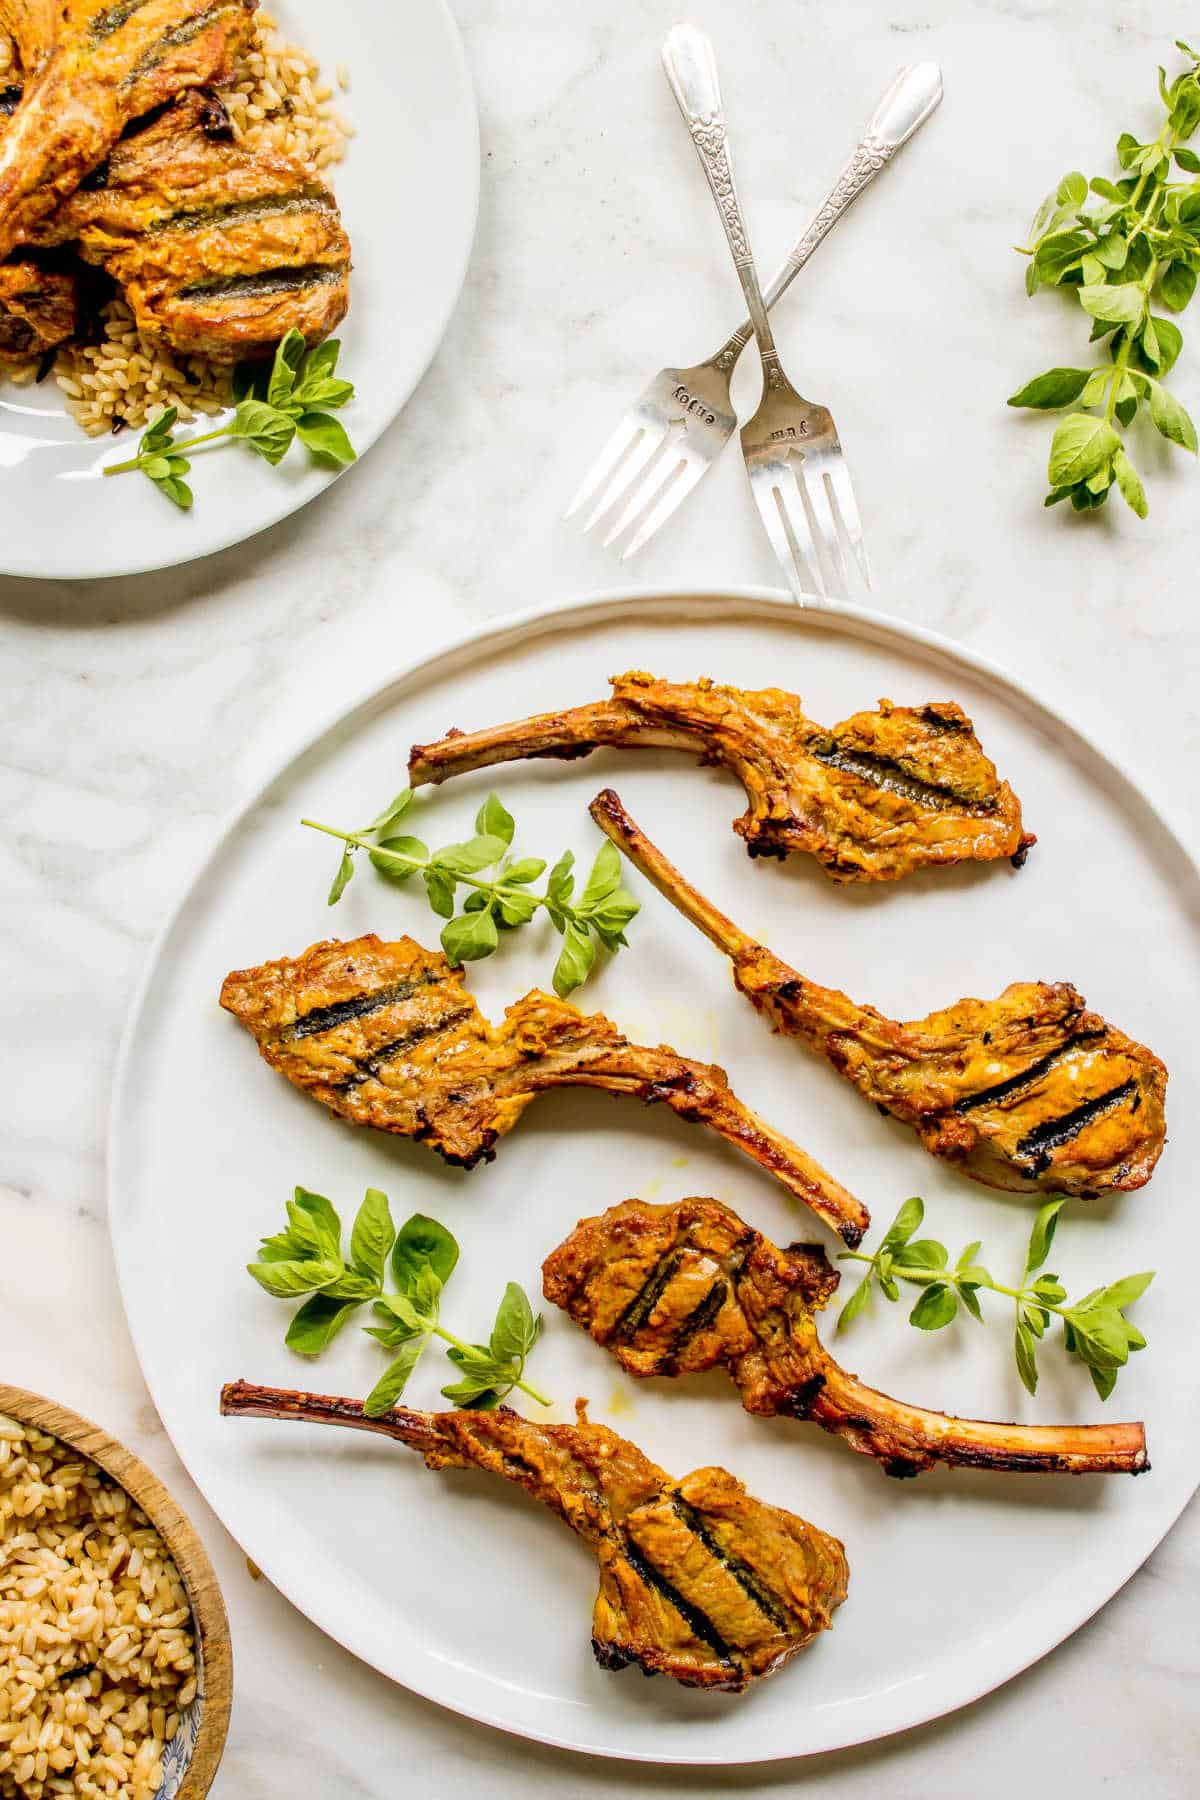 Grilled Lamb Chops in a Curry Marinade on a round platter with herbs